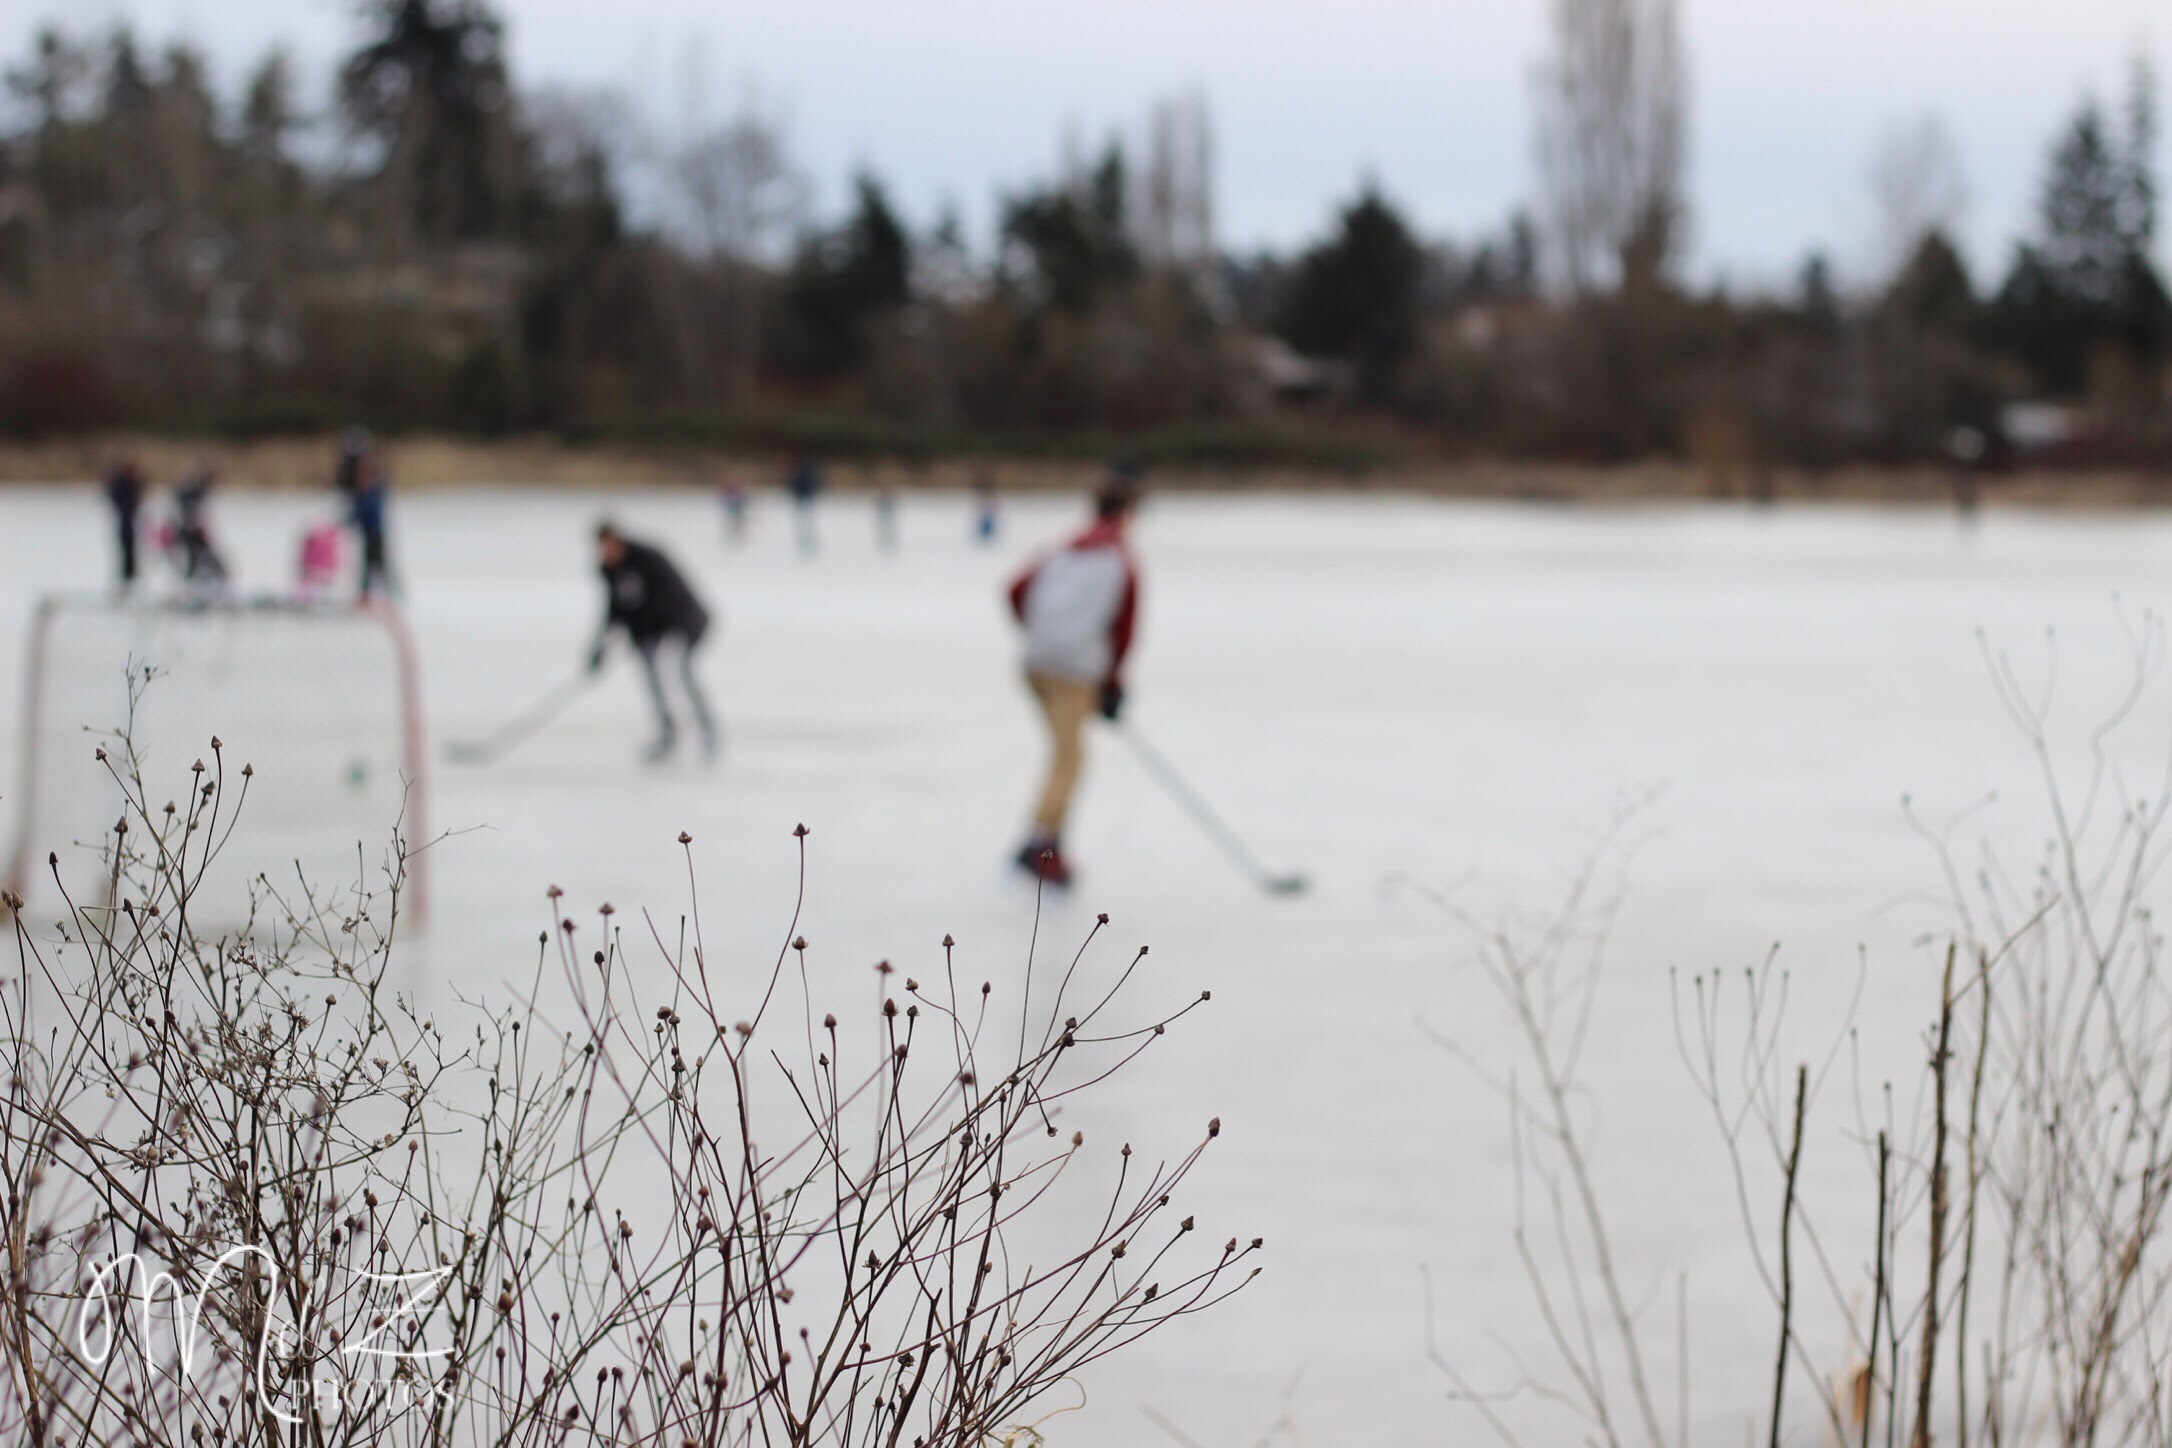 Pond Hockey and Frozen Ponds....This is Victoria? (Photos) - Ocean 98.5